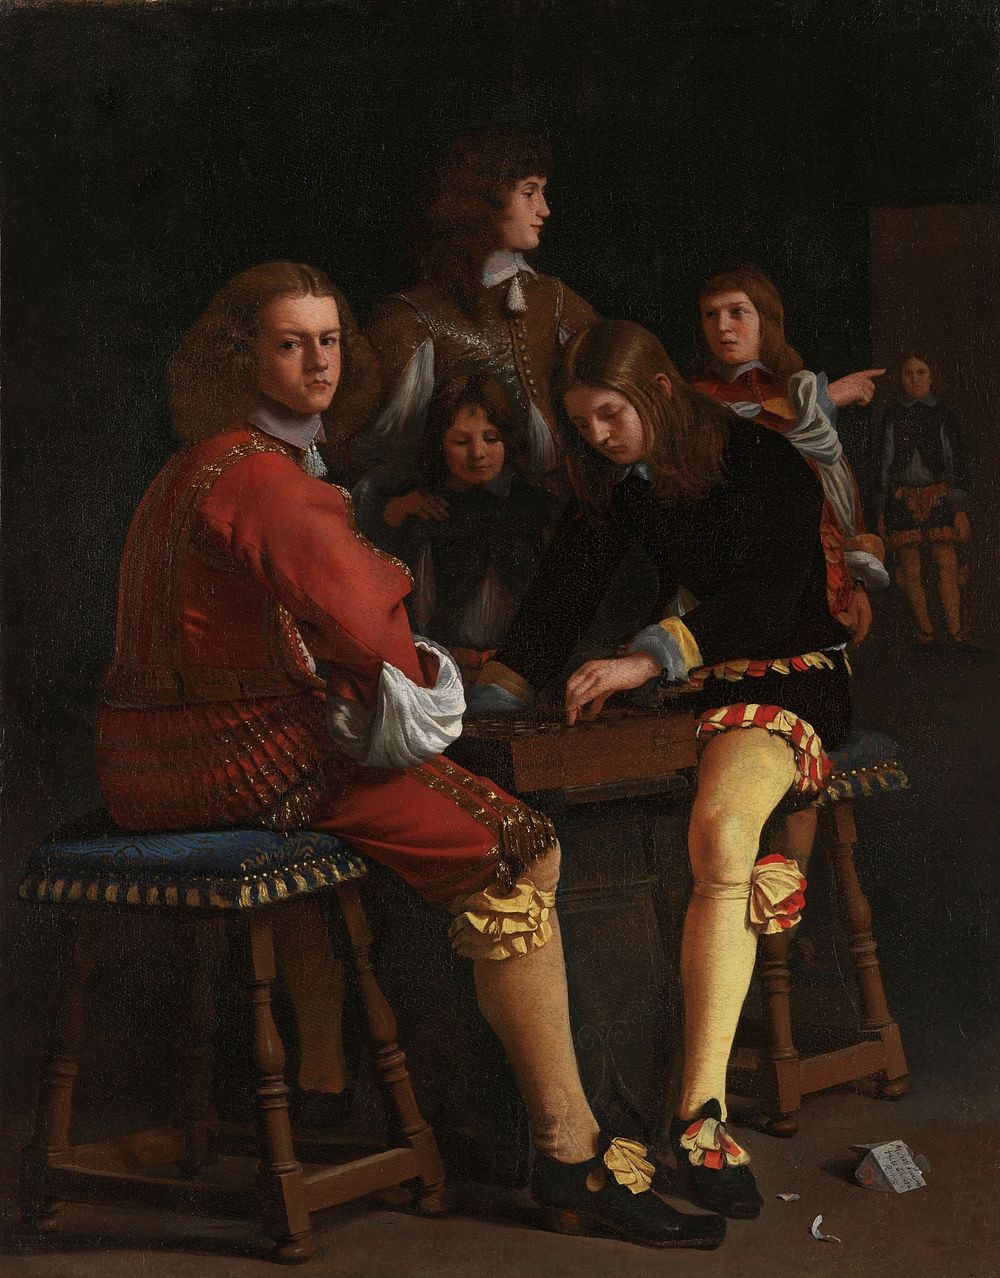 The Draughts Players (1652) by Michael Sweerts